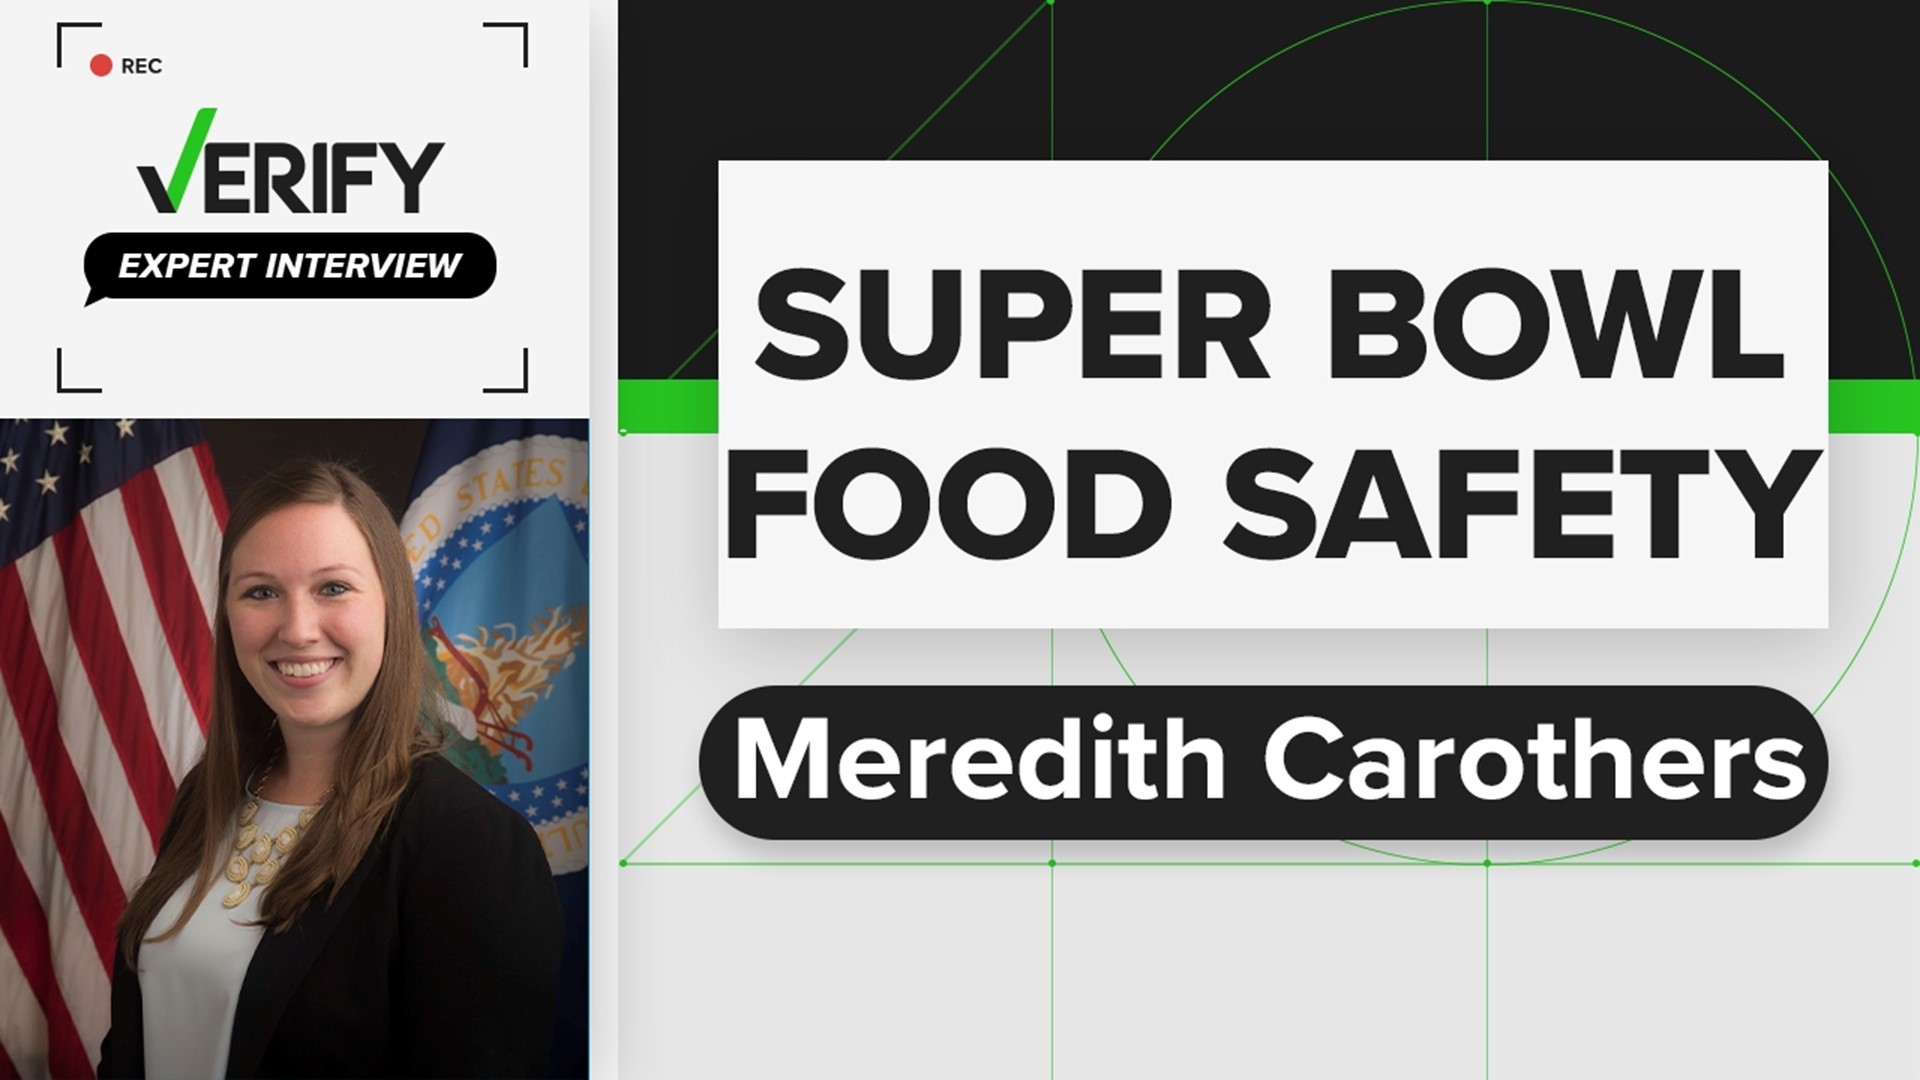 Meredith Carothers of the USDA breaks down food safety tips for Super Bowl Sunday, what’s safe to eat and when.